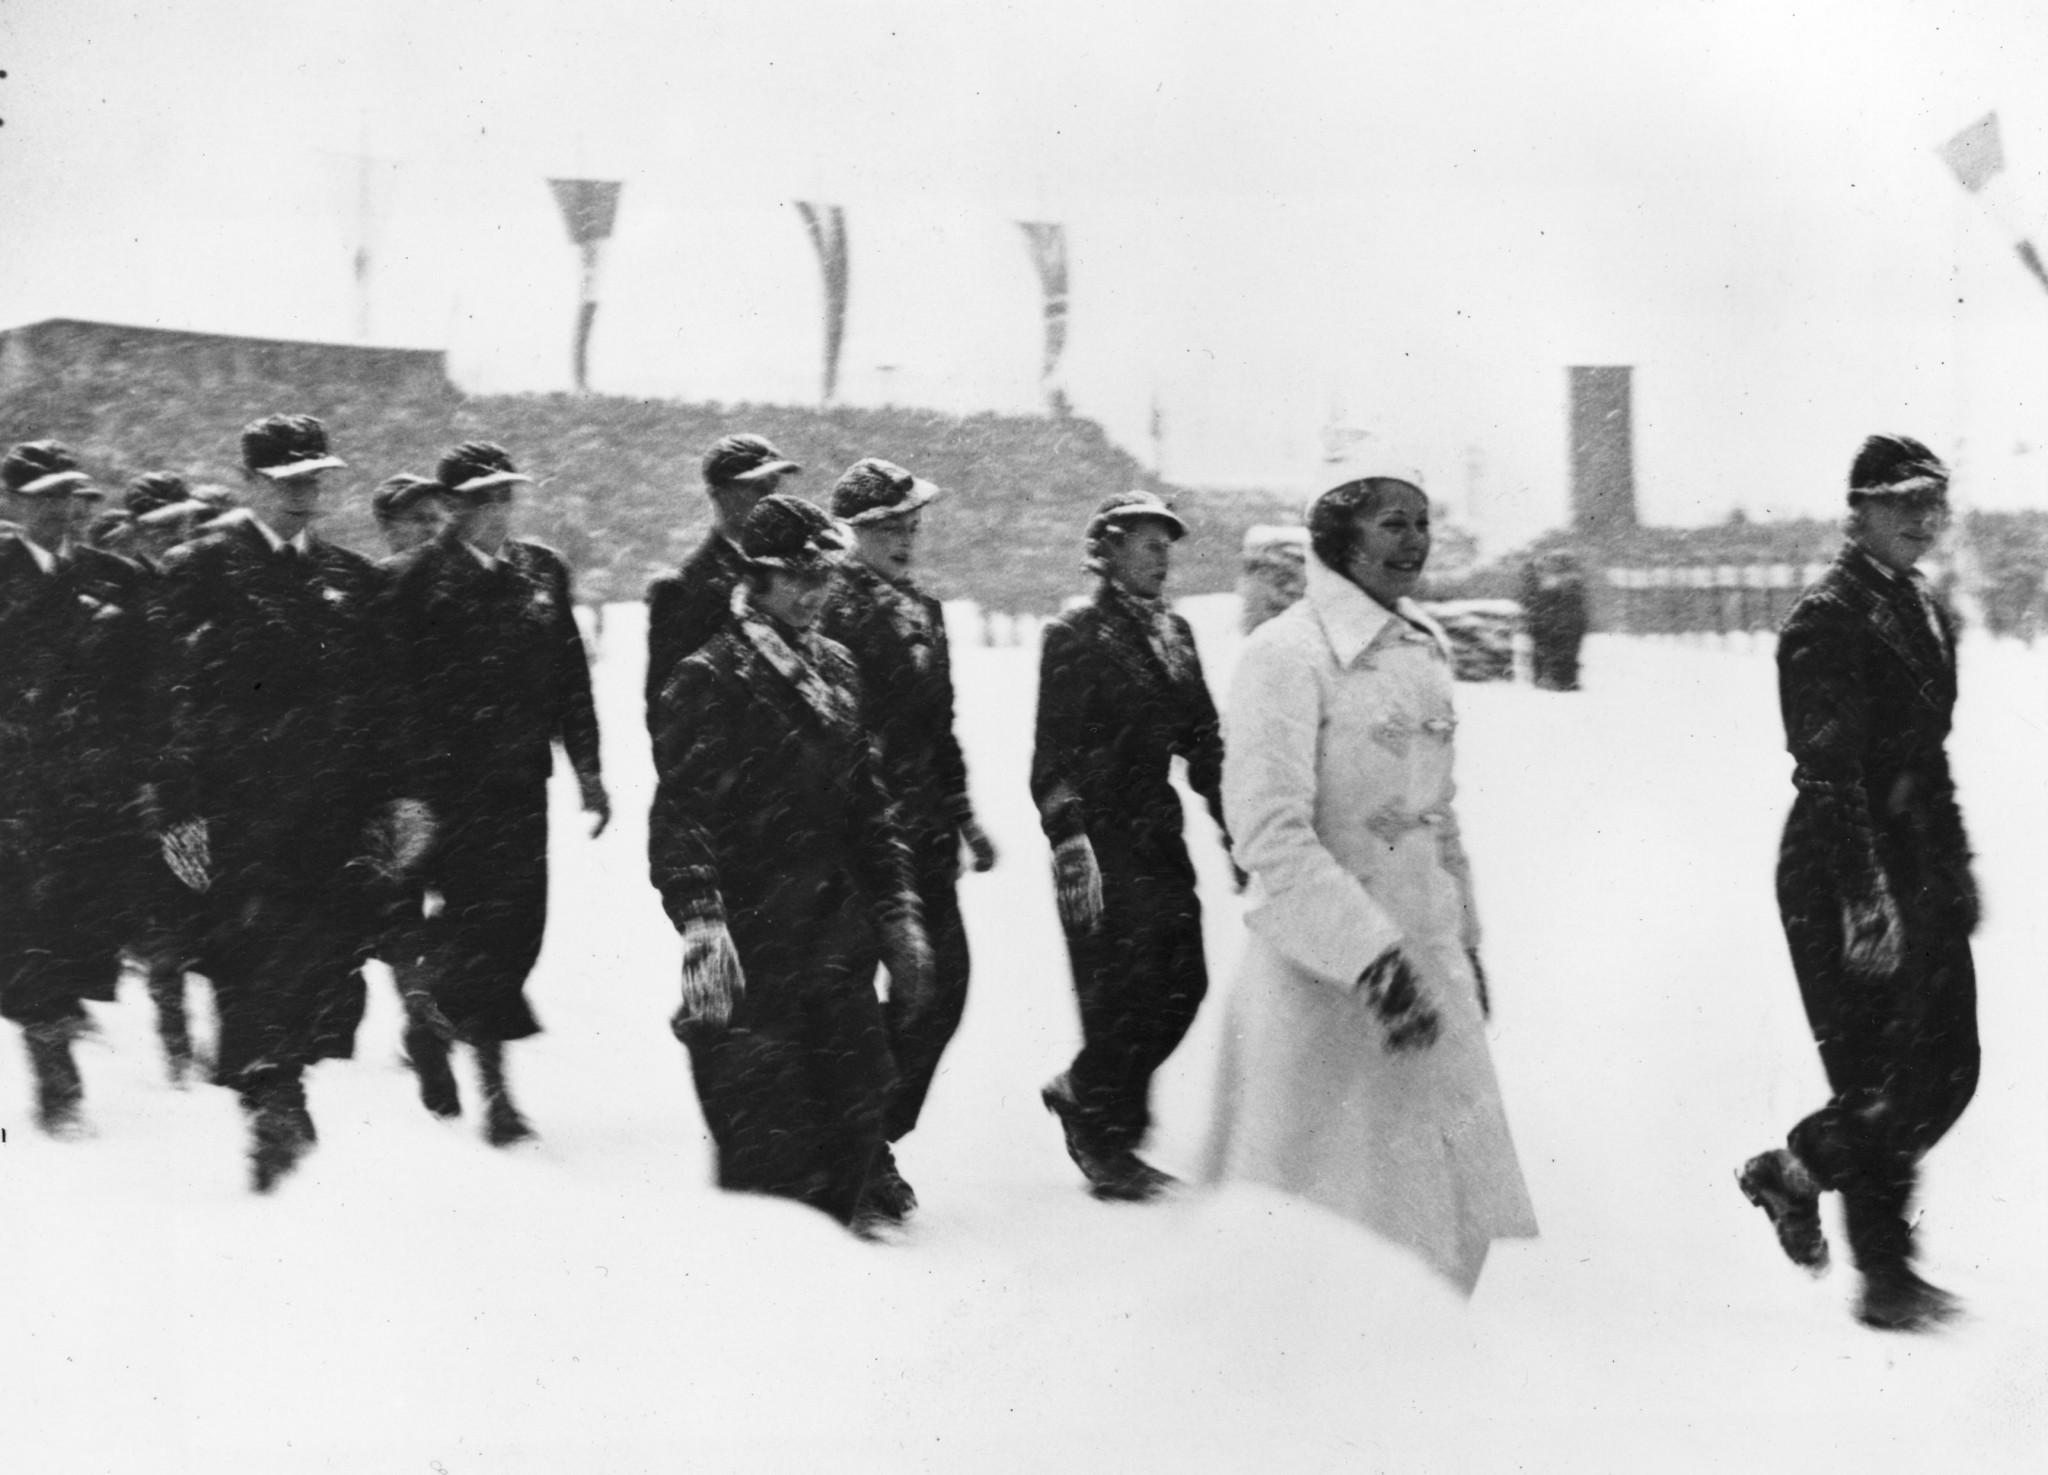 Baron Falz-Fein also participated at the Garmisch-Partenkirchen Winter Olympic Games in 1936 ©Getty Images